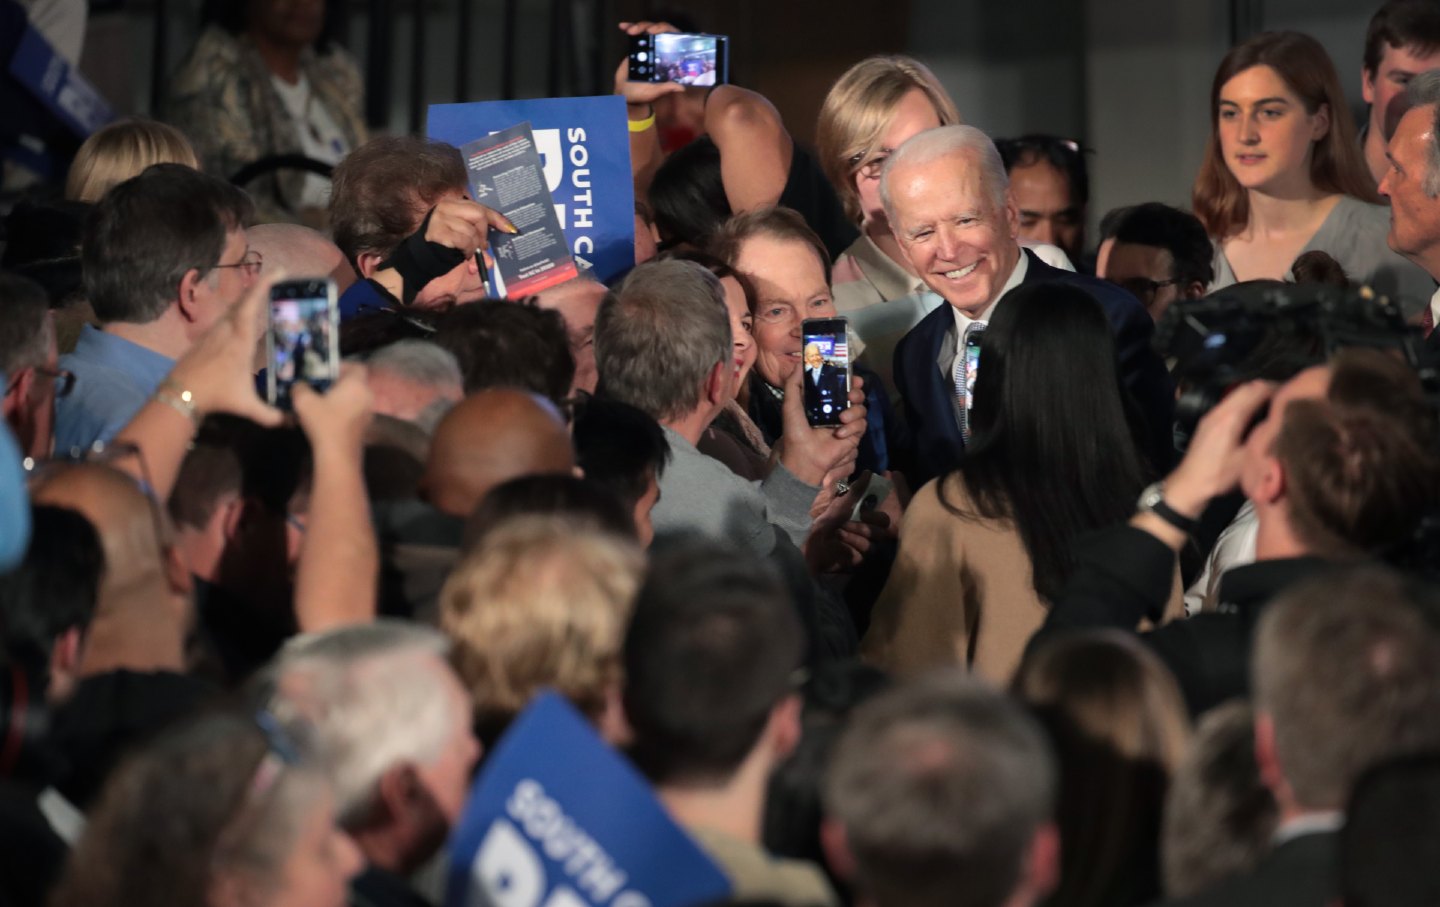 Joe Biden takes pictures with supporters